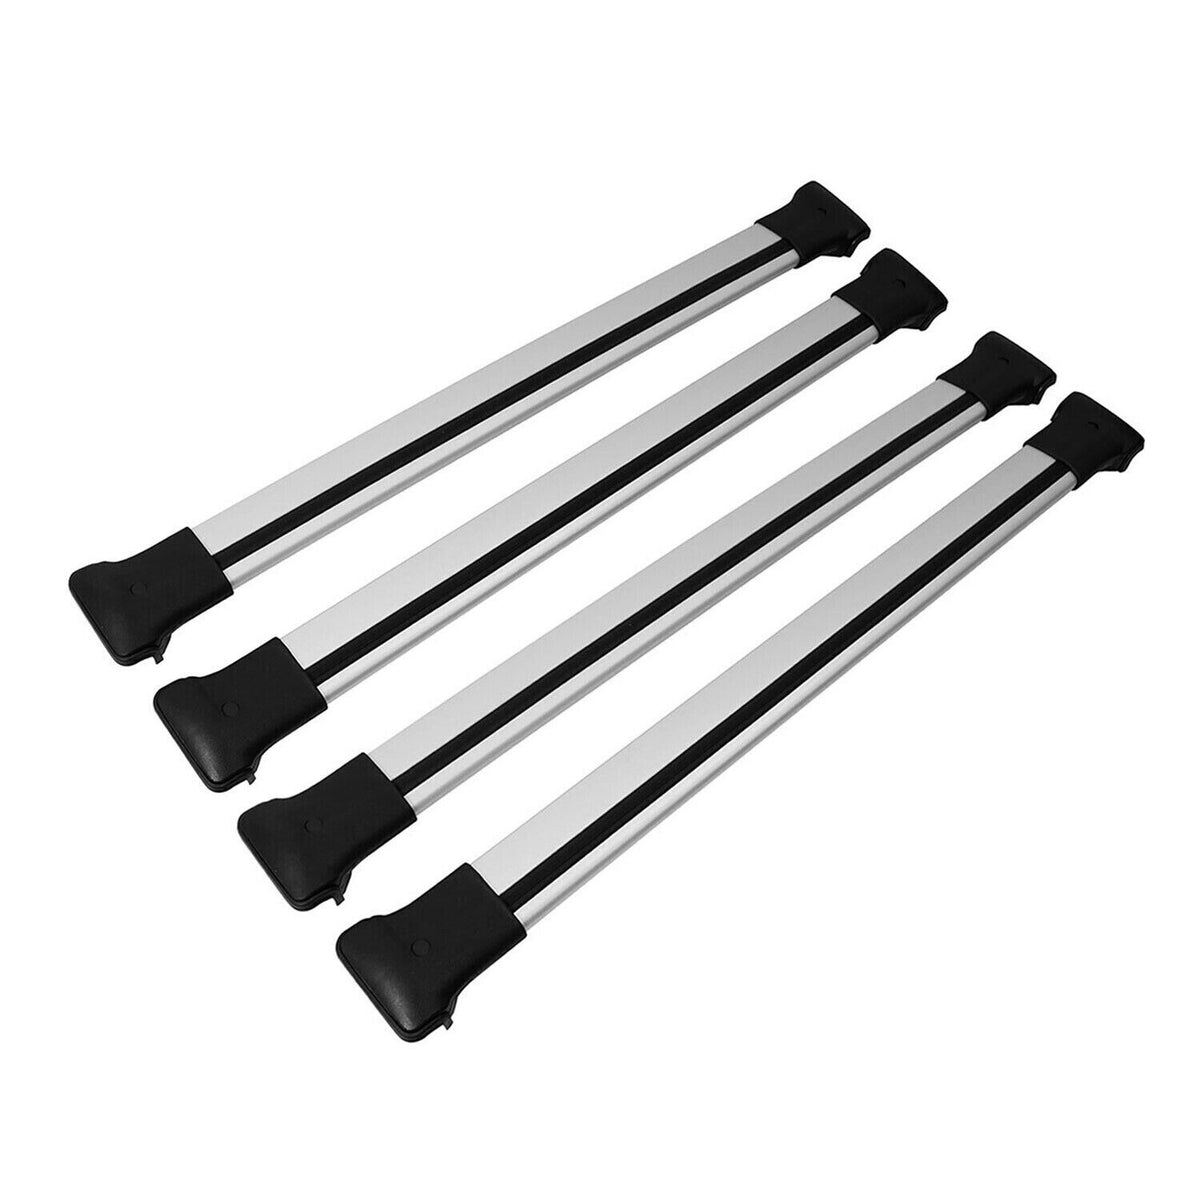 Roof rack luggage rack for Mercedes Vito Viano W639 railing rack aluminum silver 4x